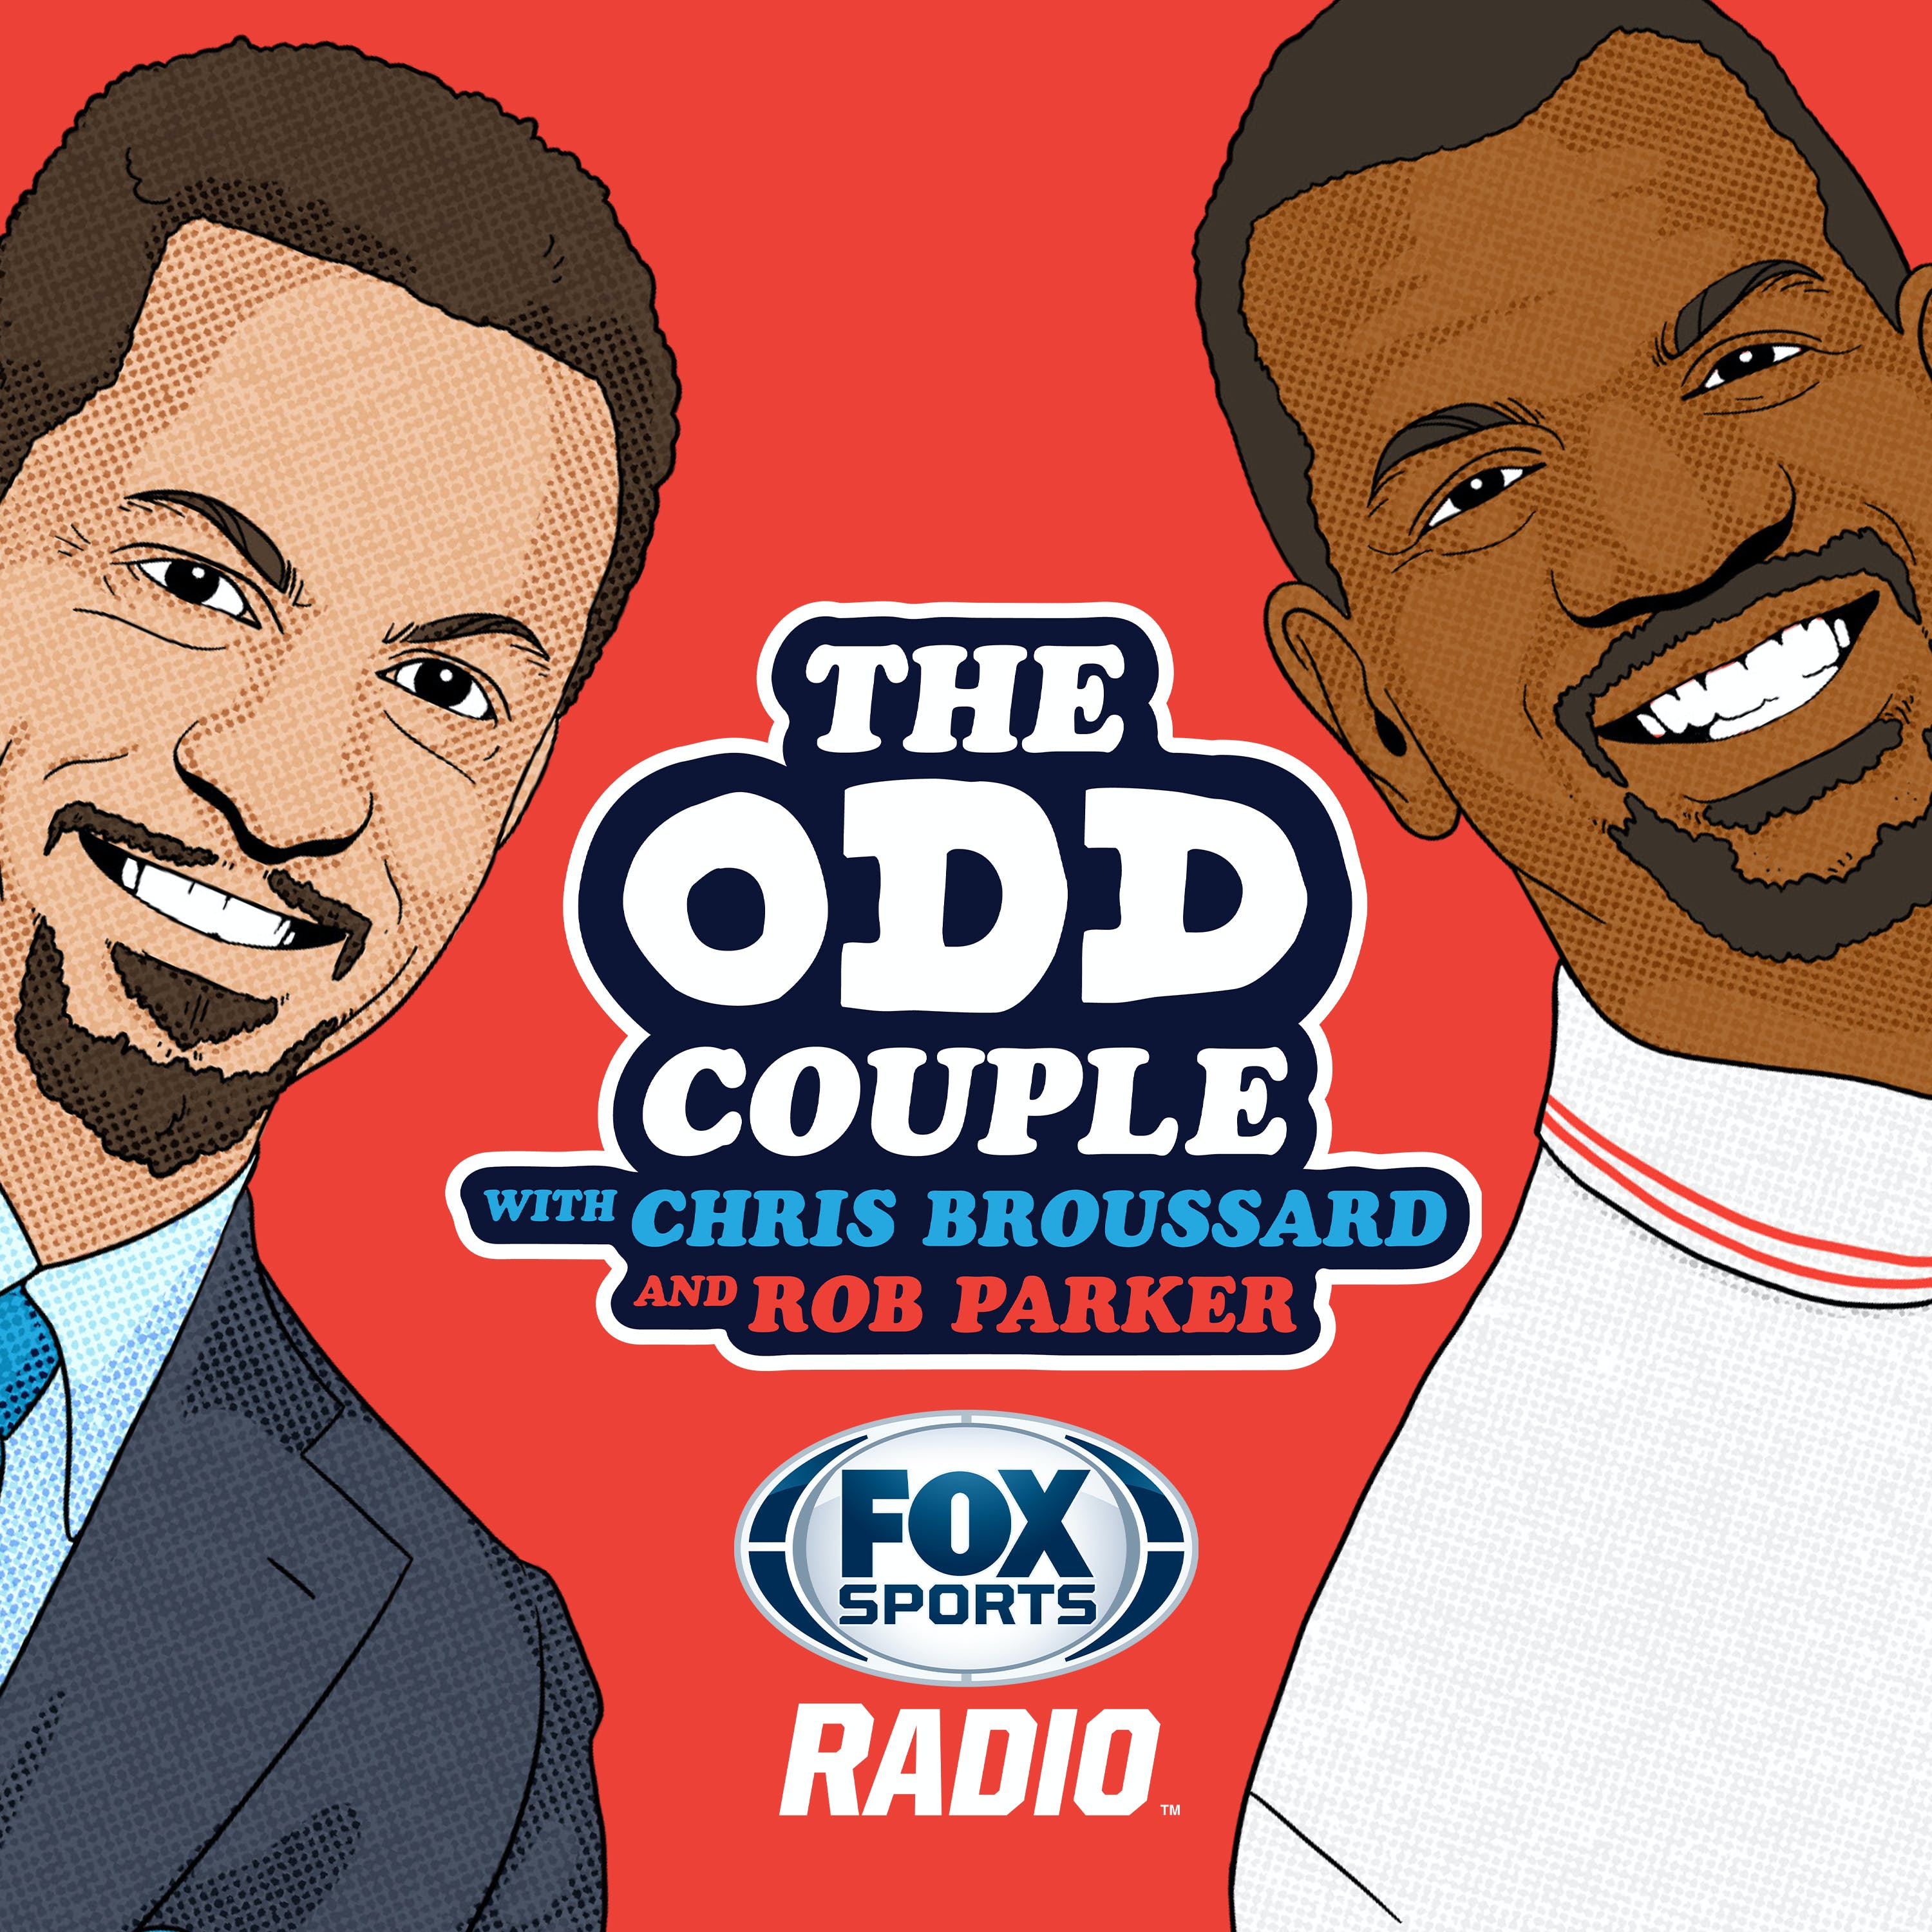 01/26/2021 - Best of The Odd Couple